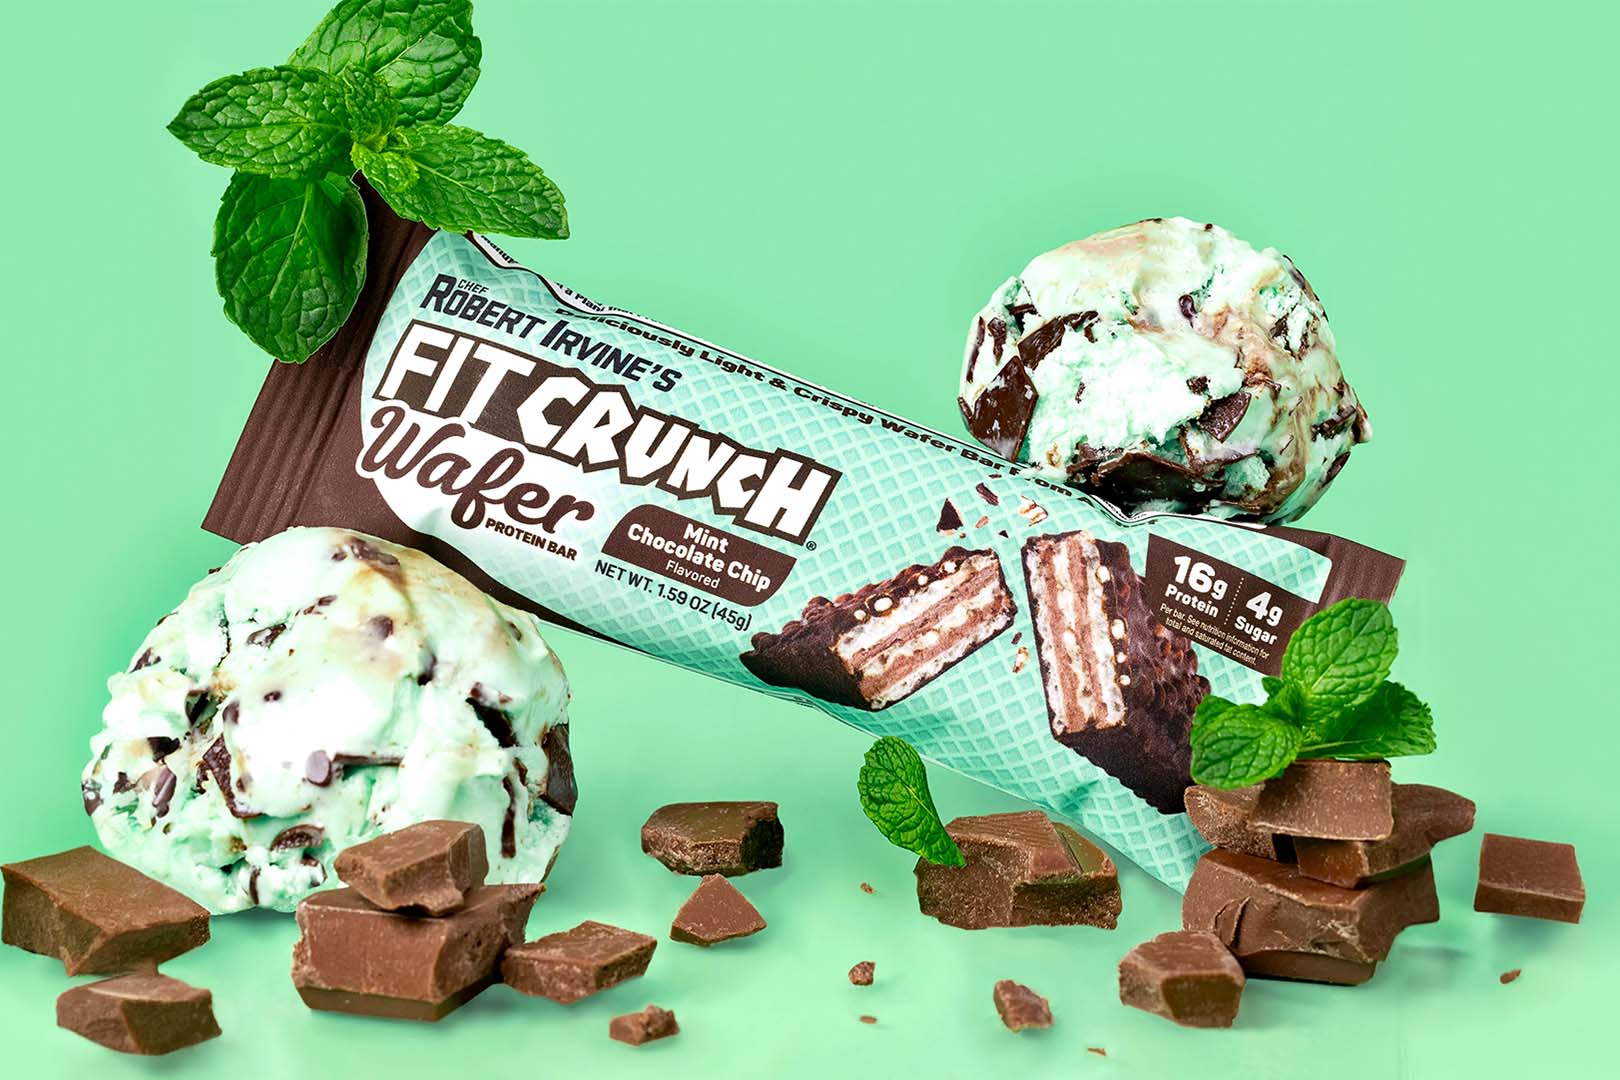 Mint Chocolate Fitcrunch Wafer Protein Bar